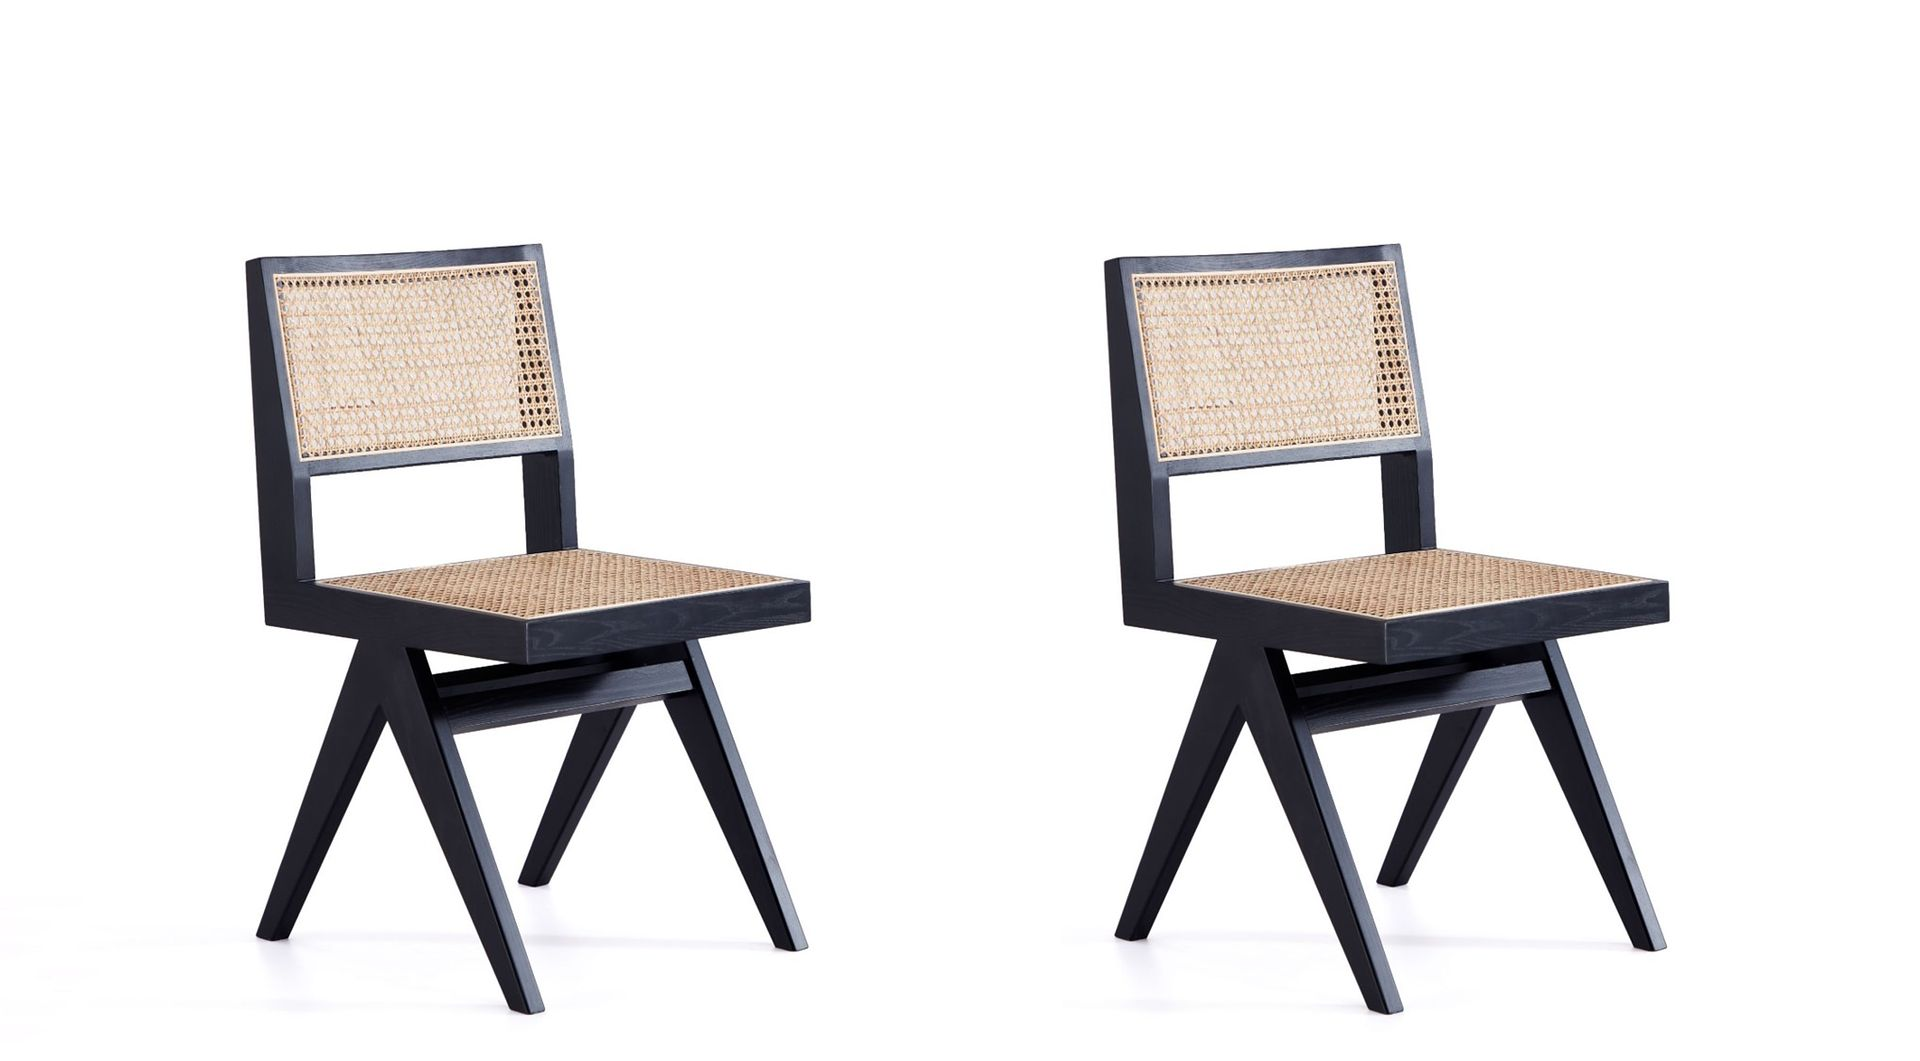 Hamlet Dining Chair in Nature Cane - Set of 2